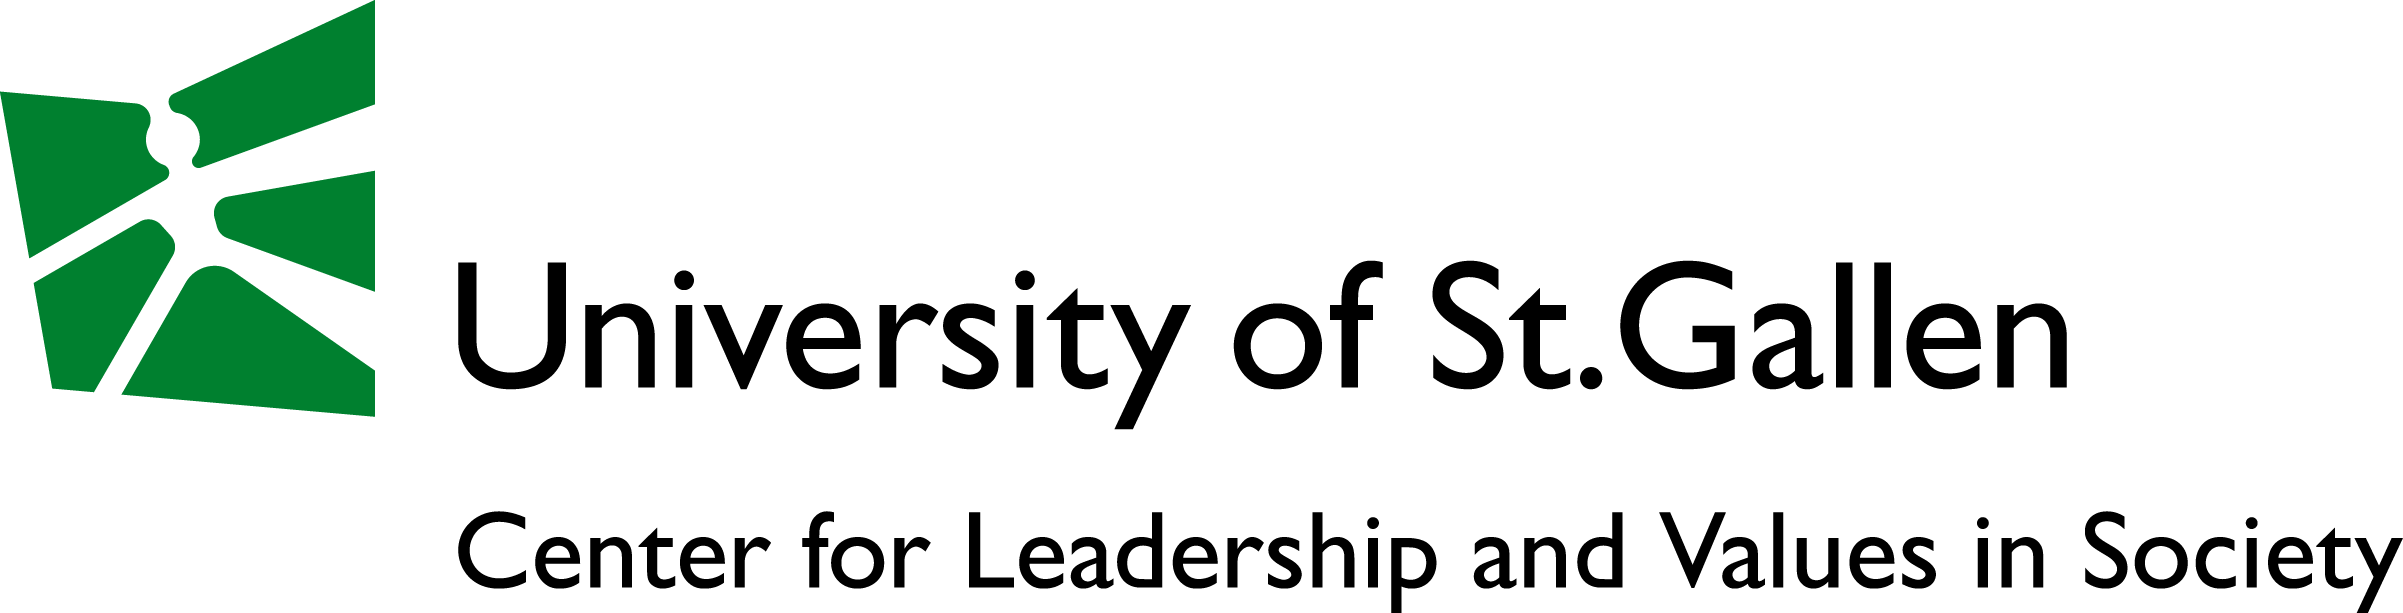 Center for Leadership and Values in Society (CLVS-HSG)